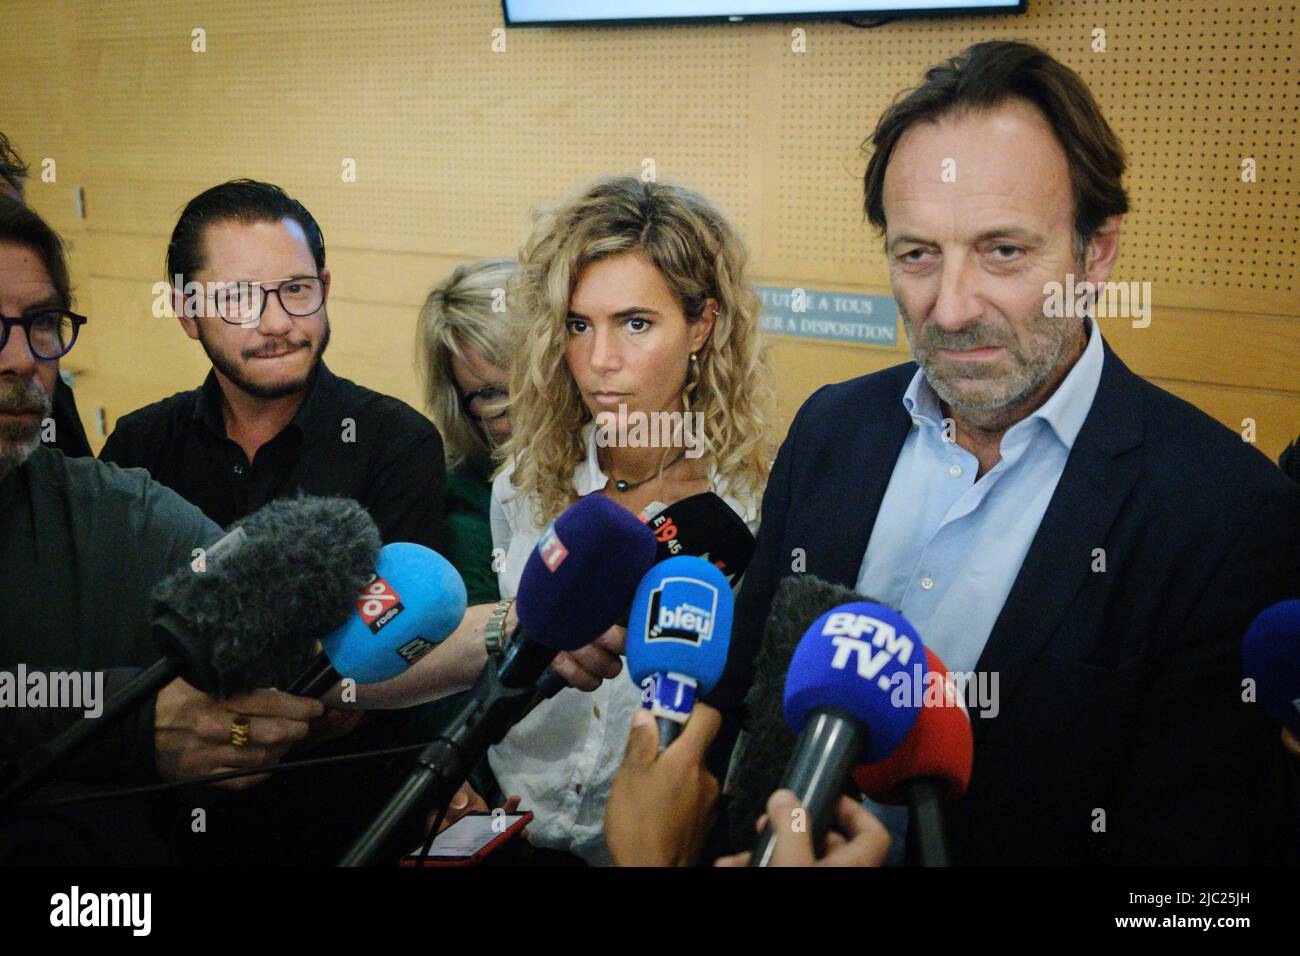 Jean-Baptiste ALARY (L), Emmanuelle FRANCK (C) and Alexandre MARTIN (R),  lawyers for Cédric Jubillar. In the case of the disappearance of Delphine,  who has led her husband Cédric JUBILLAR to pre-trial detention